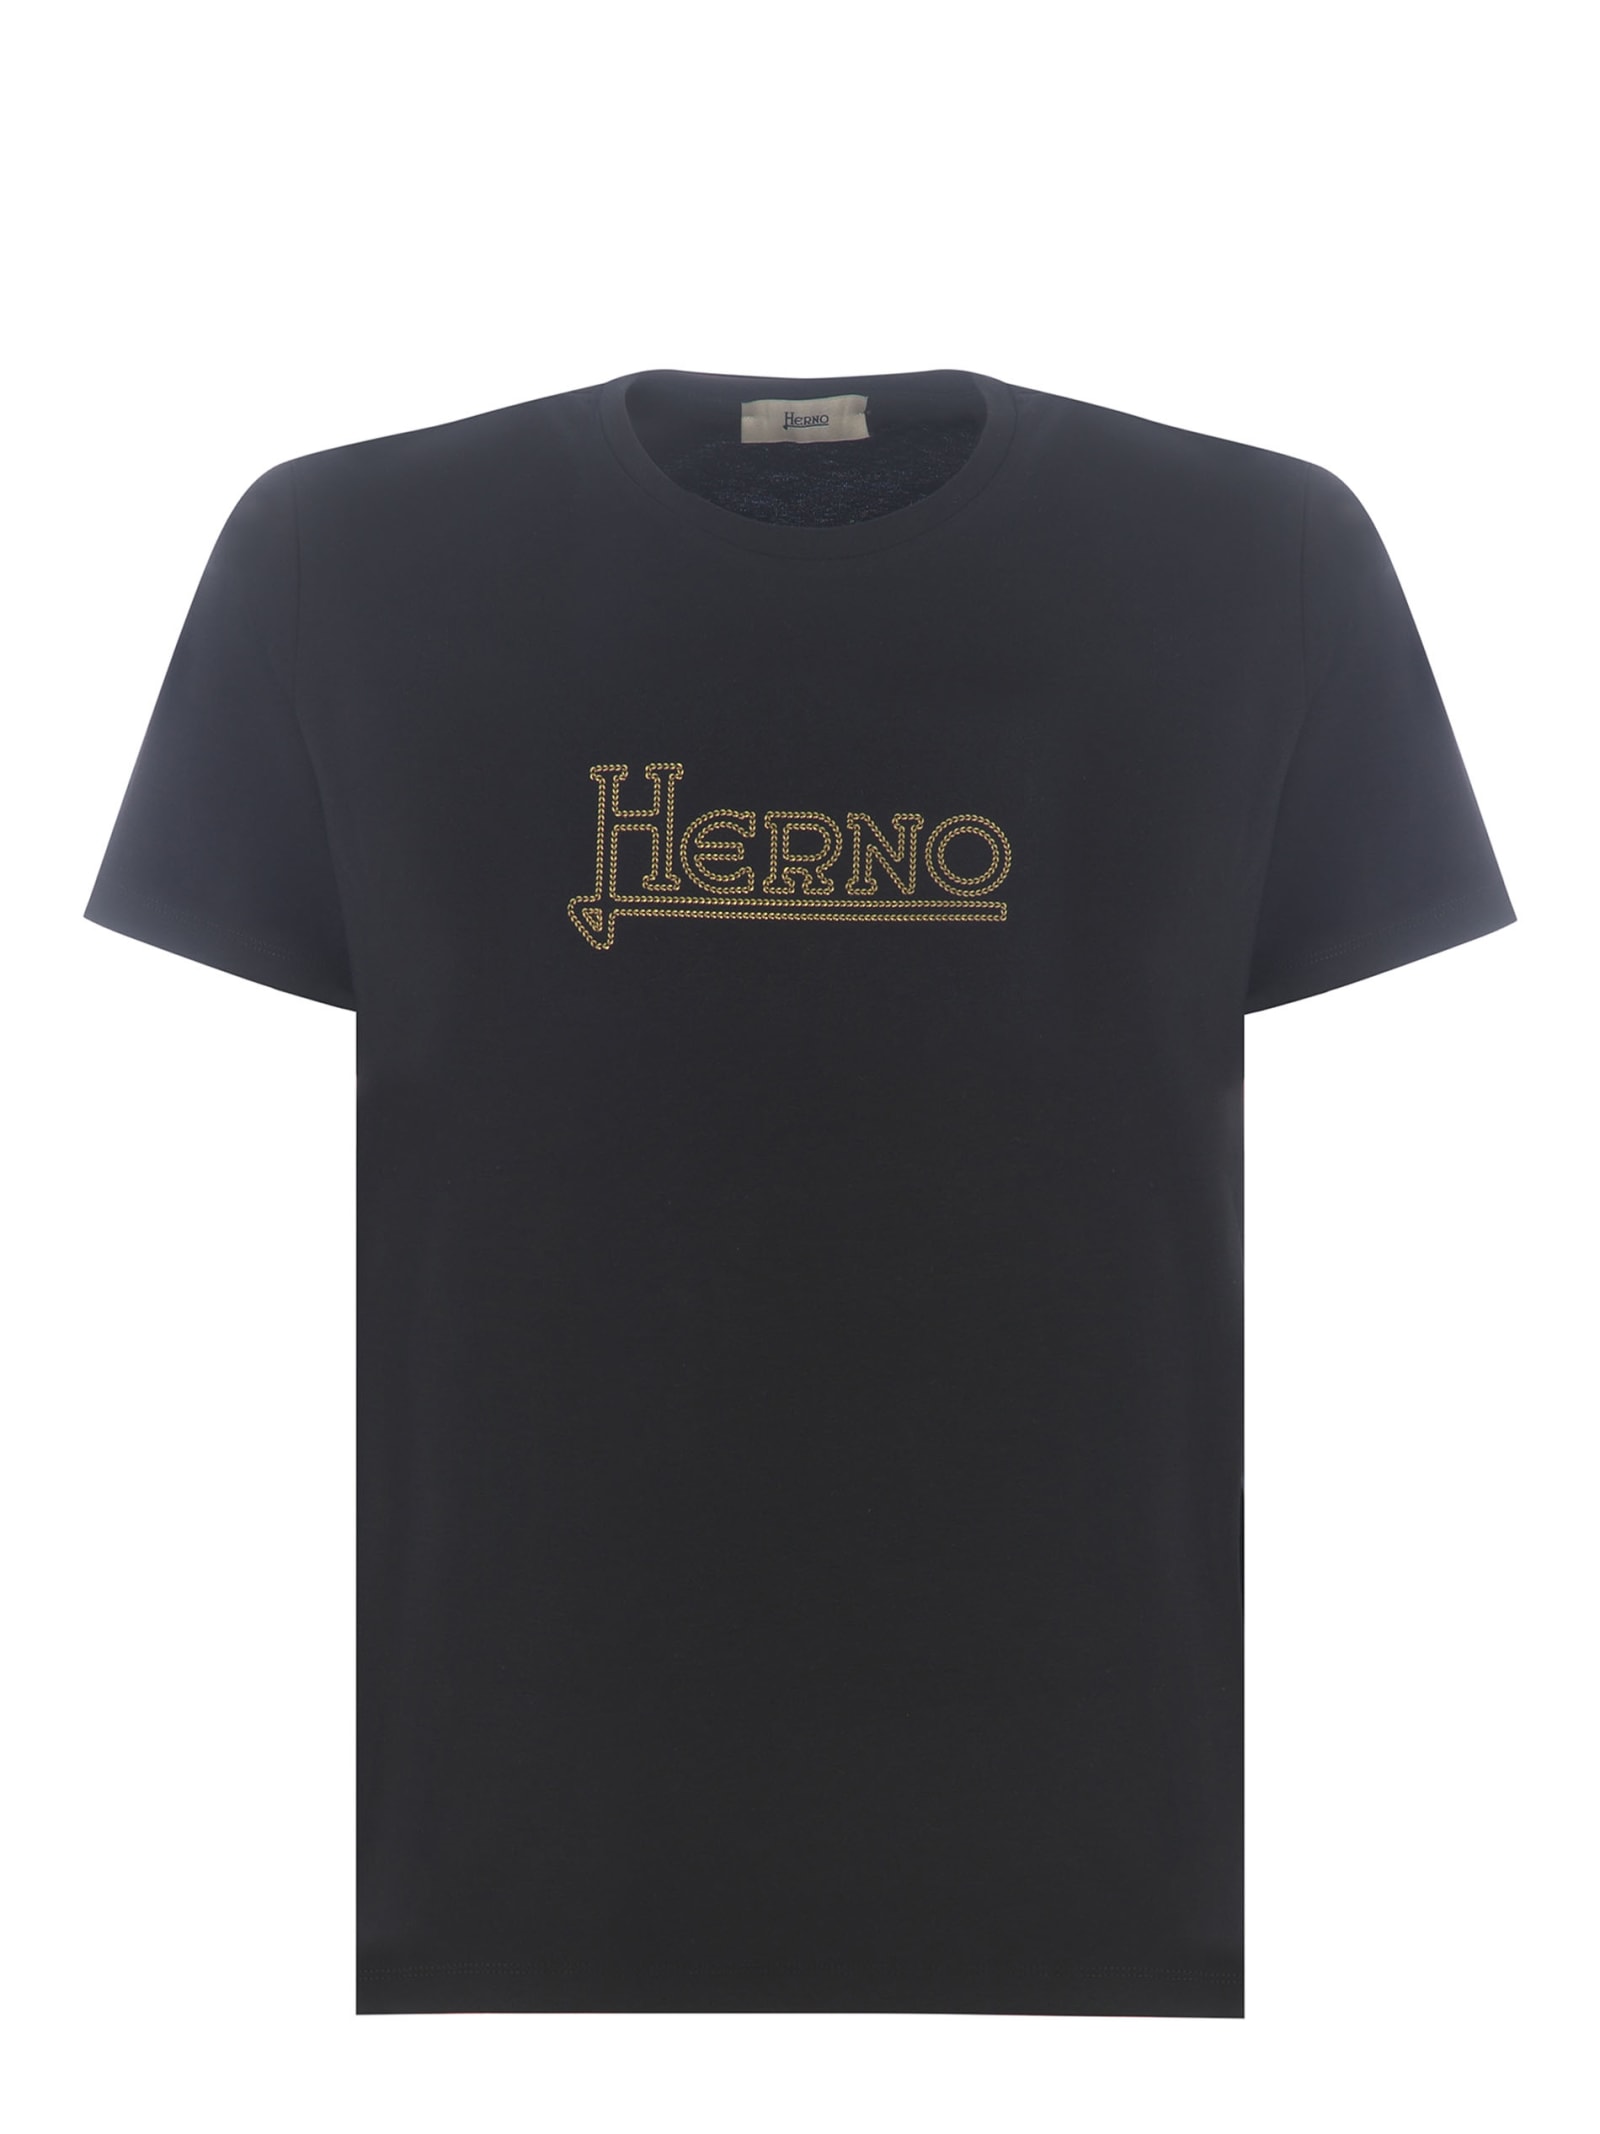 T-shirt Herno chain In Cotone